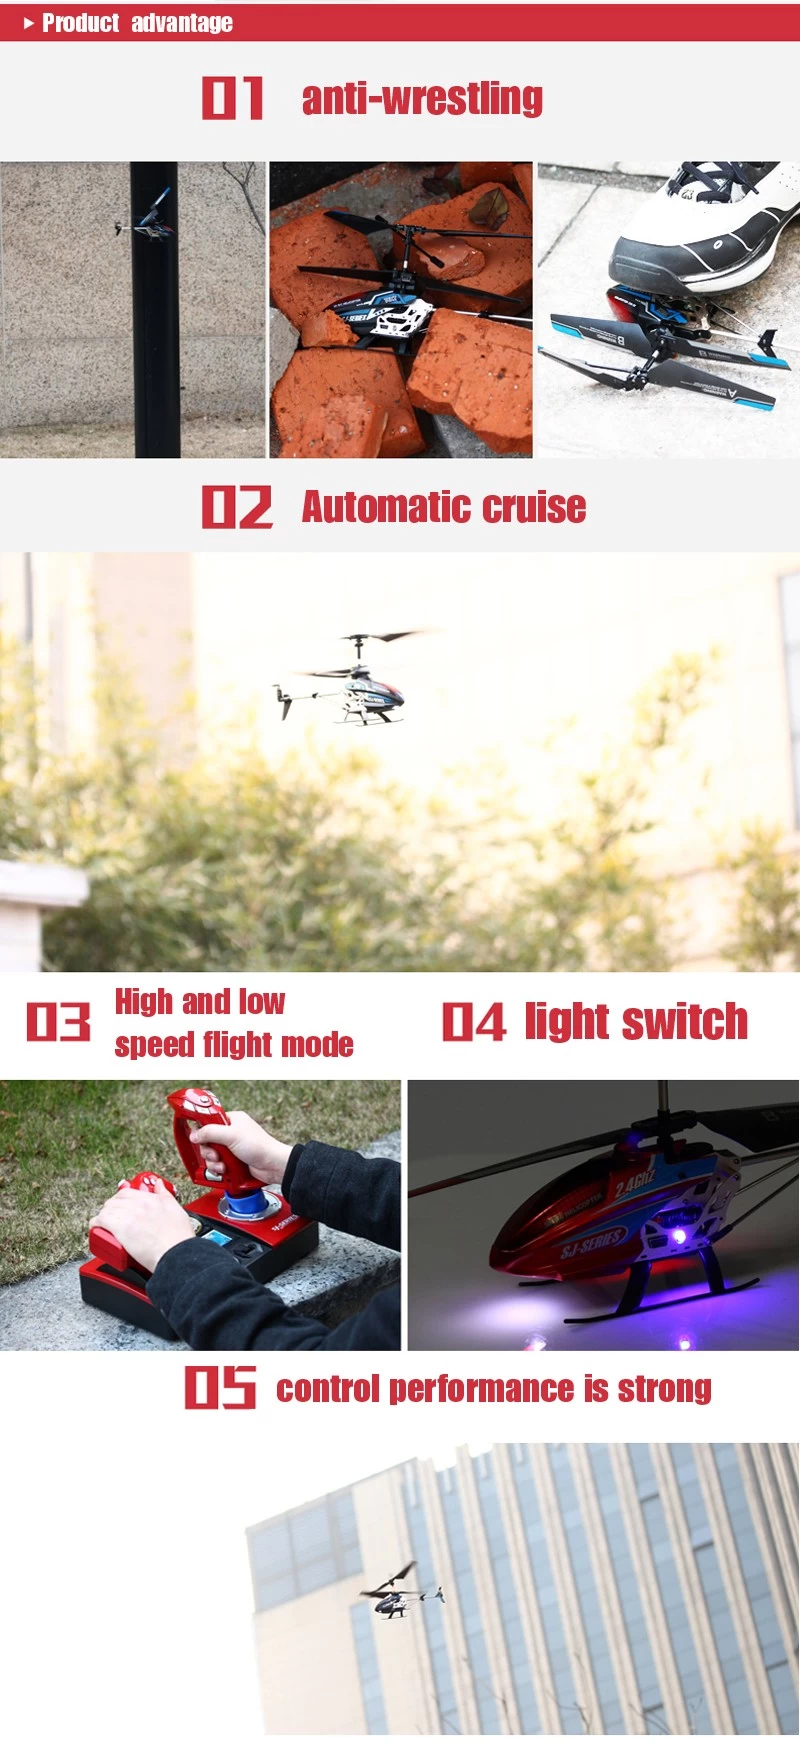 2.4G,3.5CH RC helicopter,helicopter with gyro